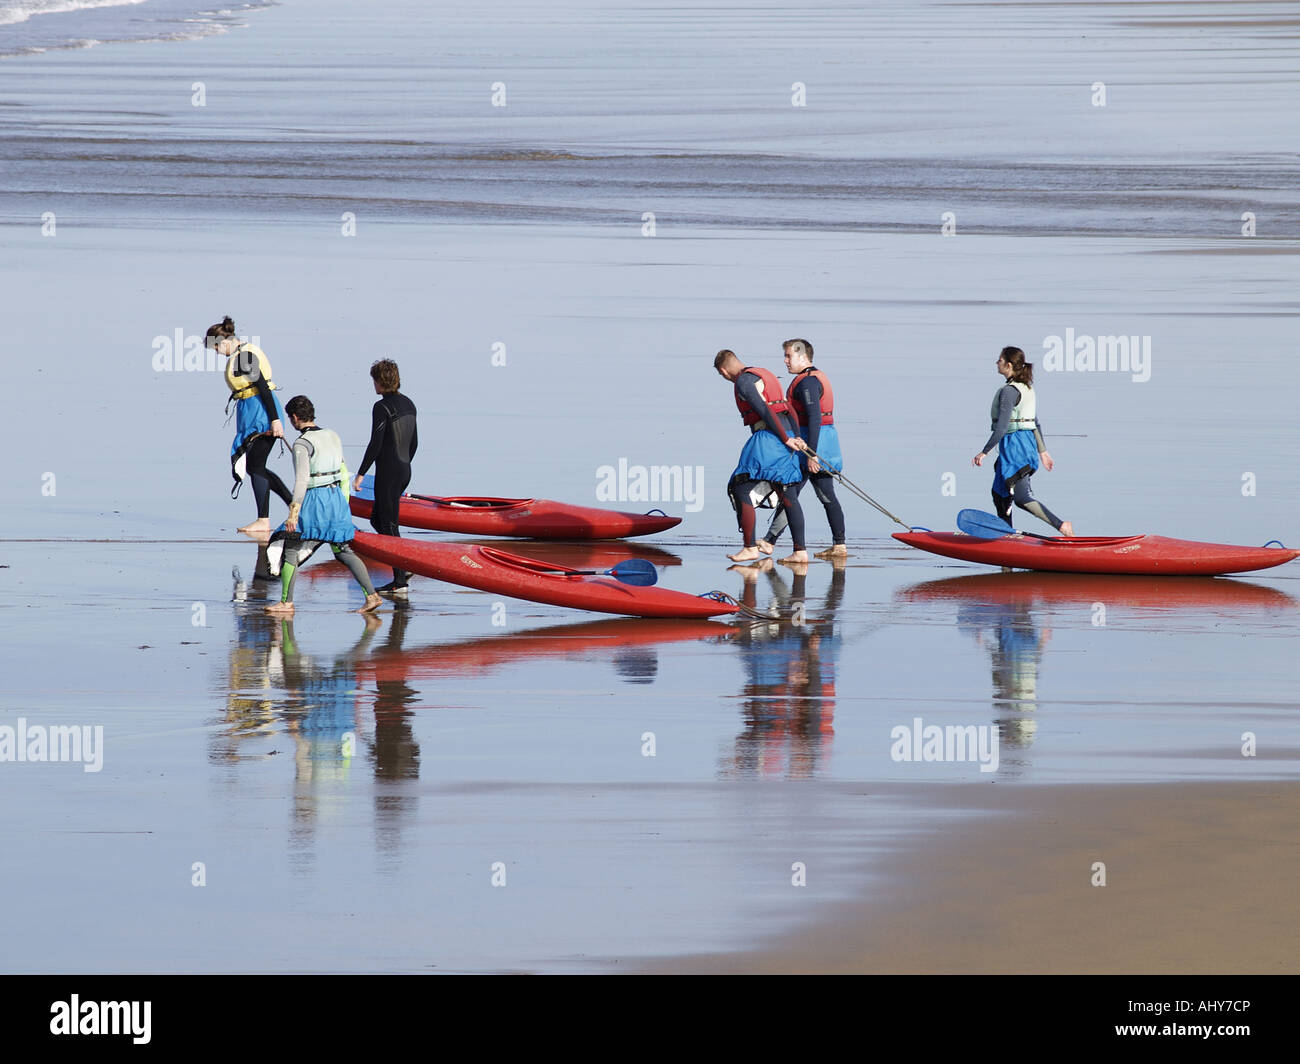 Group of 6 people pulling their kayaks along the beach towards the sea. Stock Photo